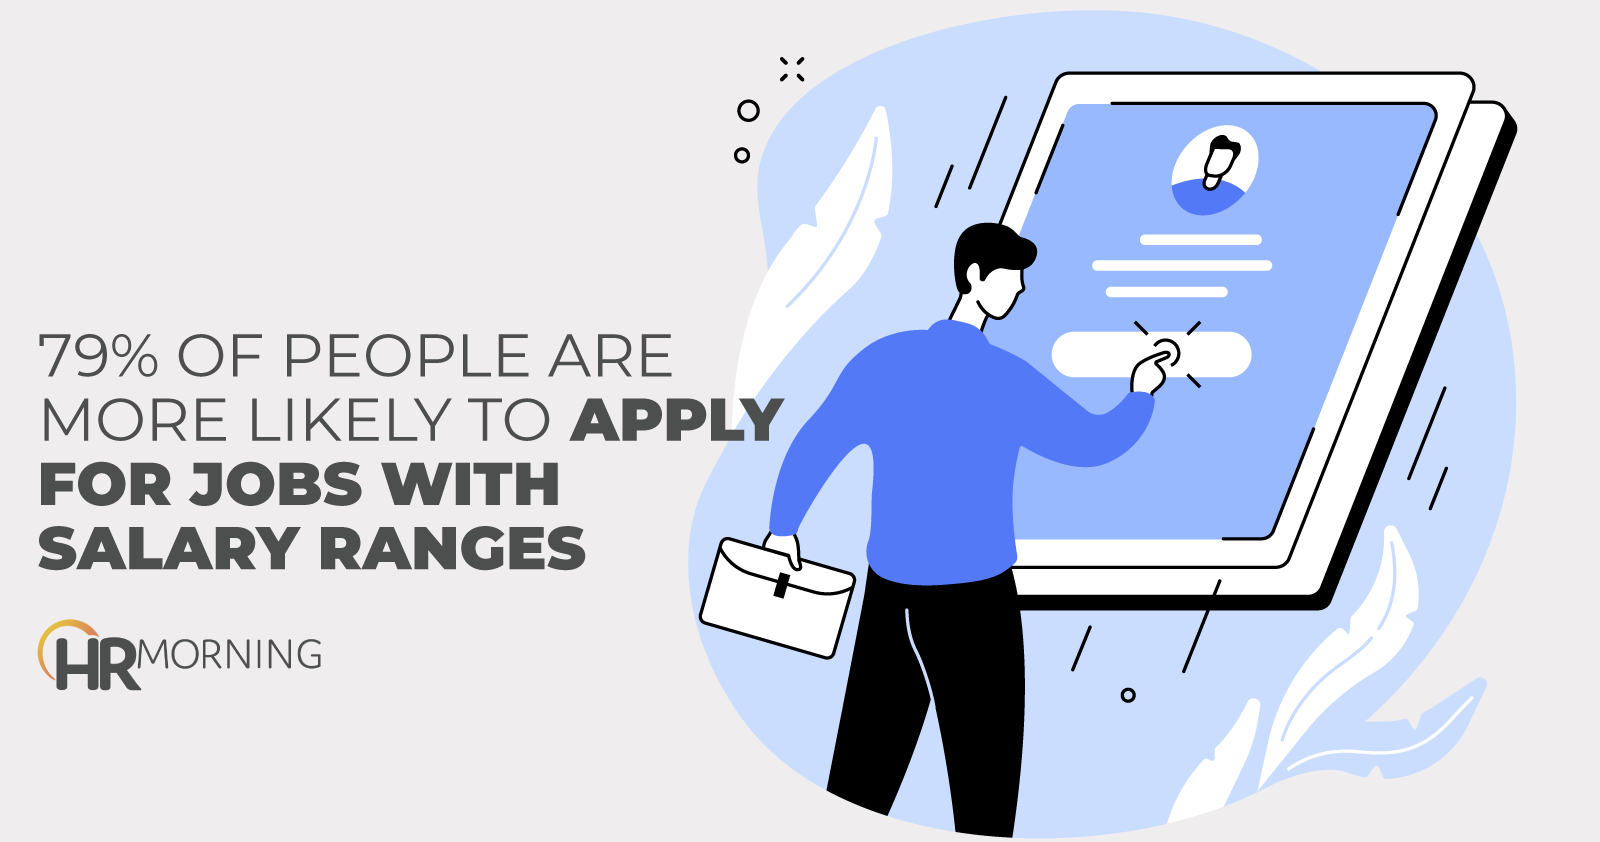 79% Of People Are More Likely To Apply For Jobs With Salary Ranges